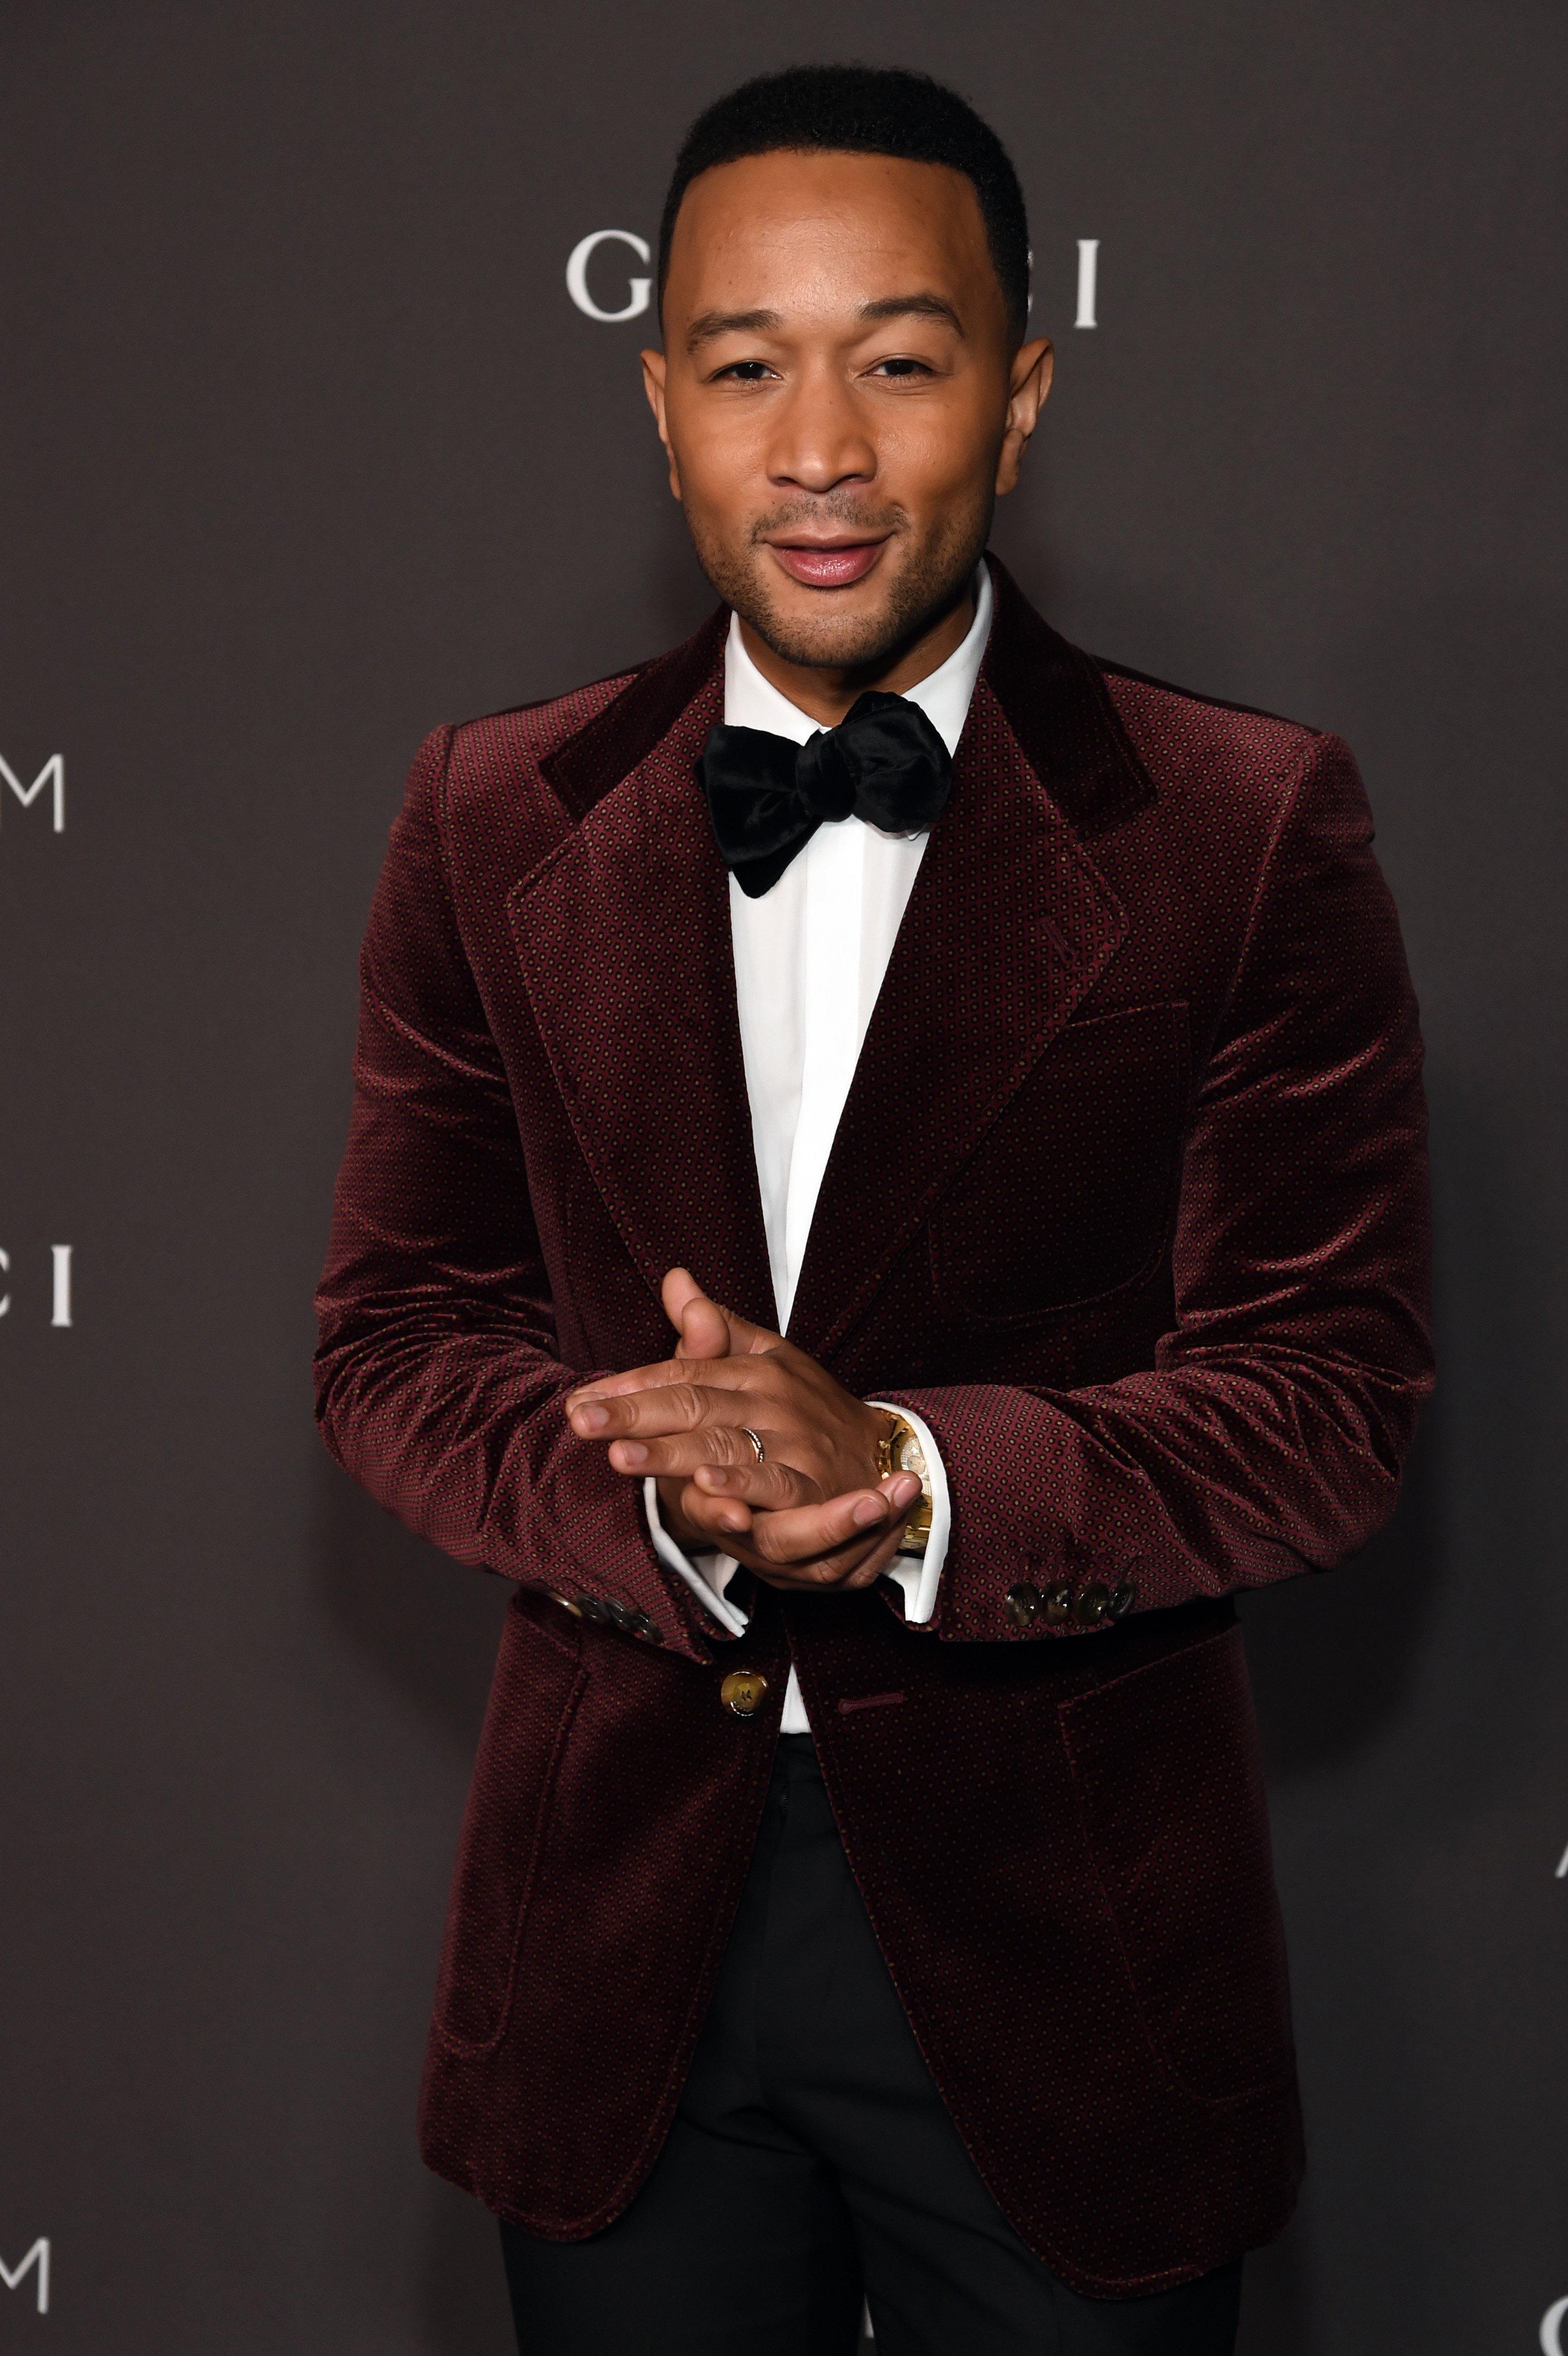 John Legend, wearing Gucci, attends the 2019 LACMA Art + Film Gala Presented By Gucci at LACMA on November 02, 2019, in Los Angeles, California. | Source: Getty Images.